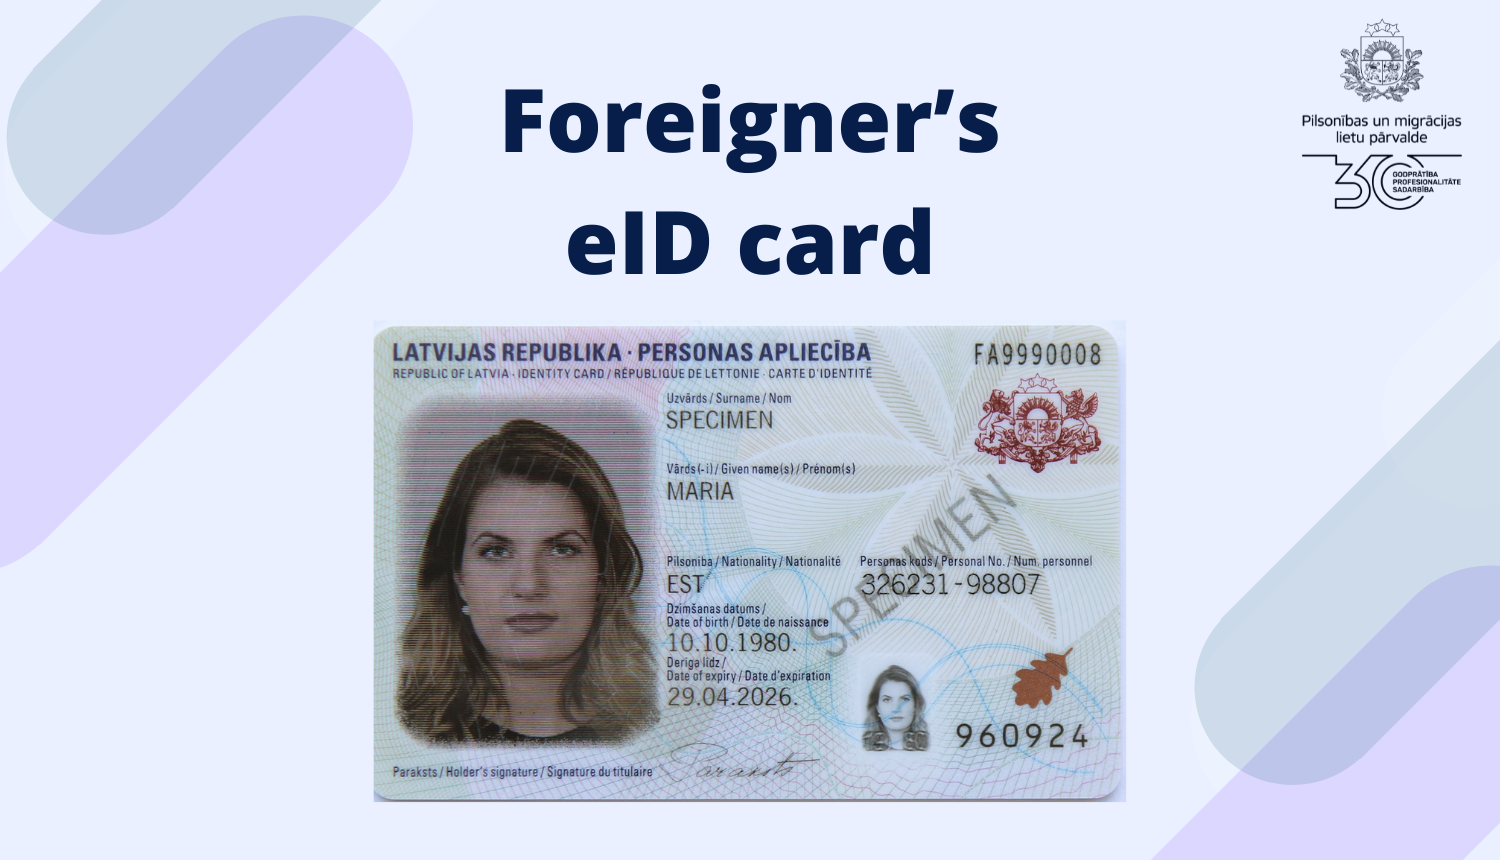 Text Foreigner's eID card and picture of Foreigner's eID card